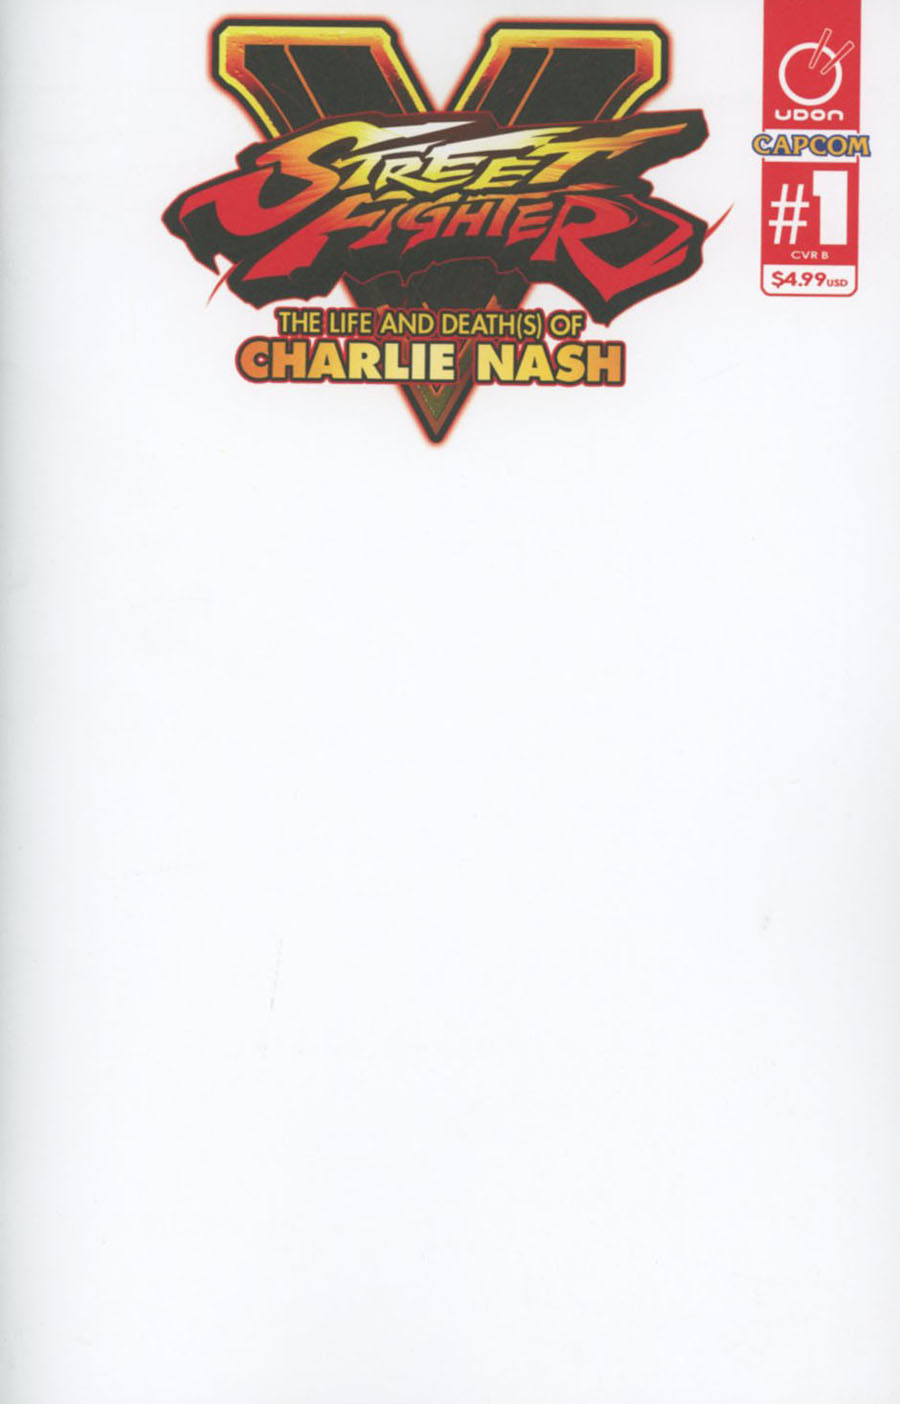 Street Fighter V Life And Death(s) Of Charlie Nash #1 Cover B Variant Blank Cover